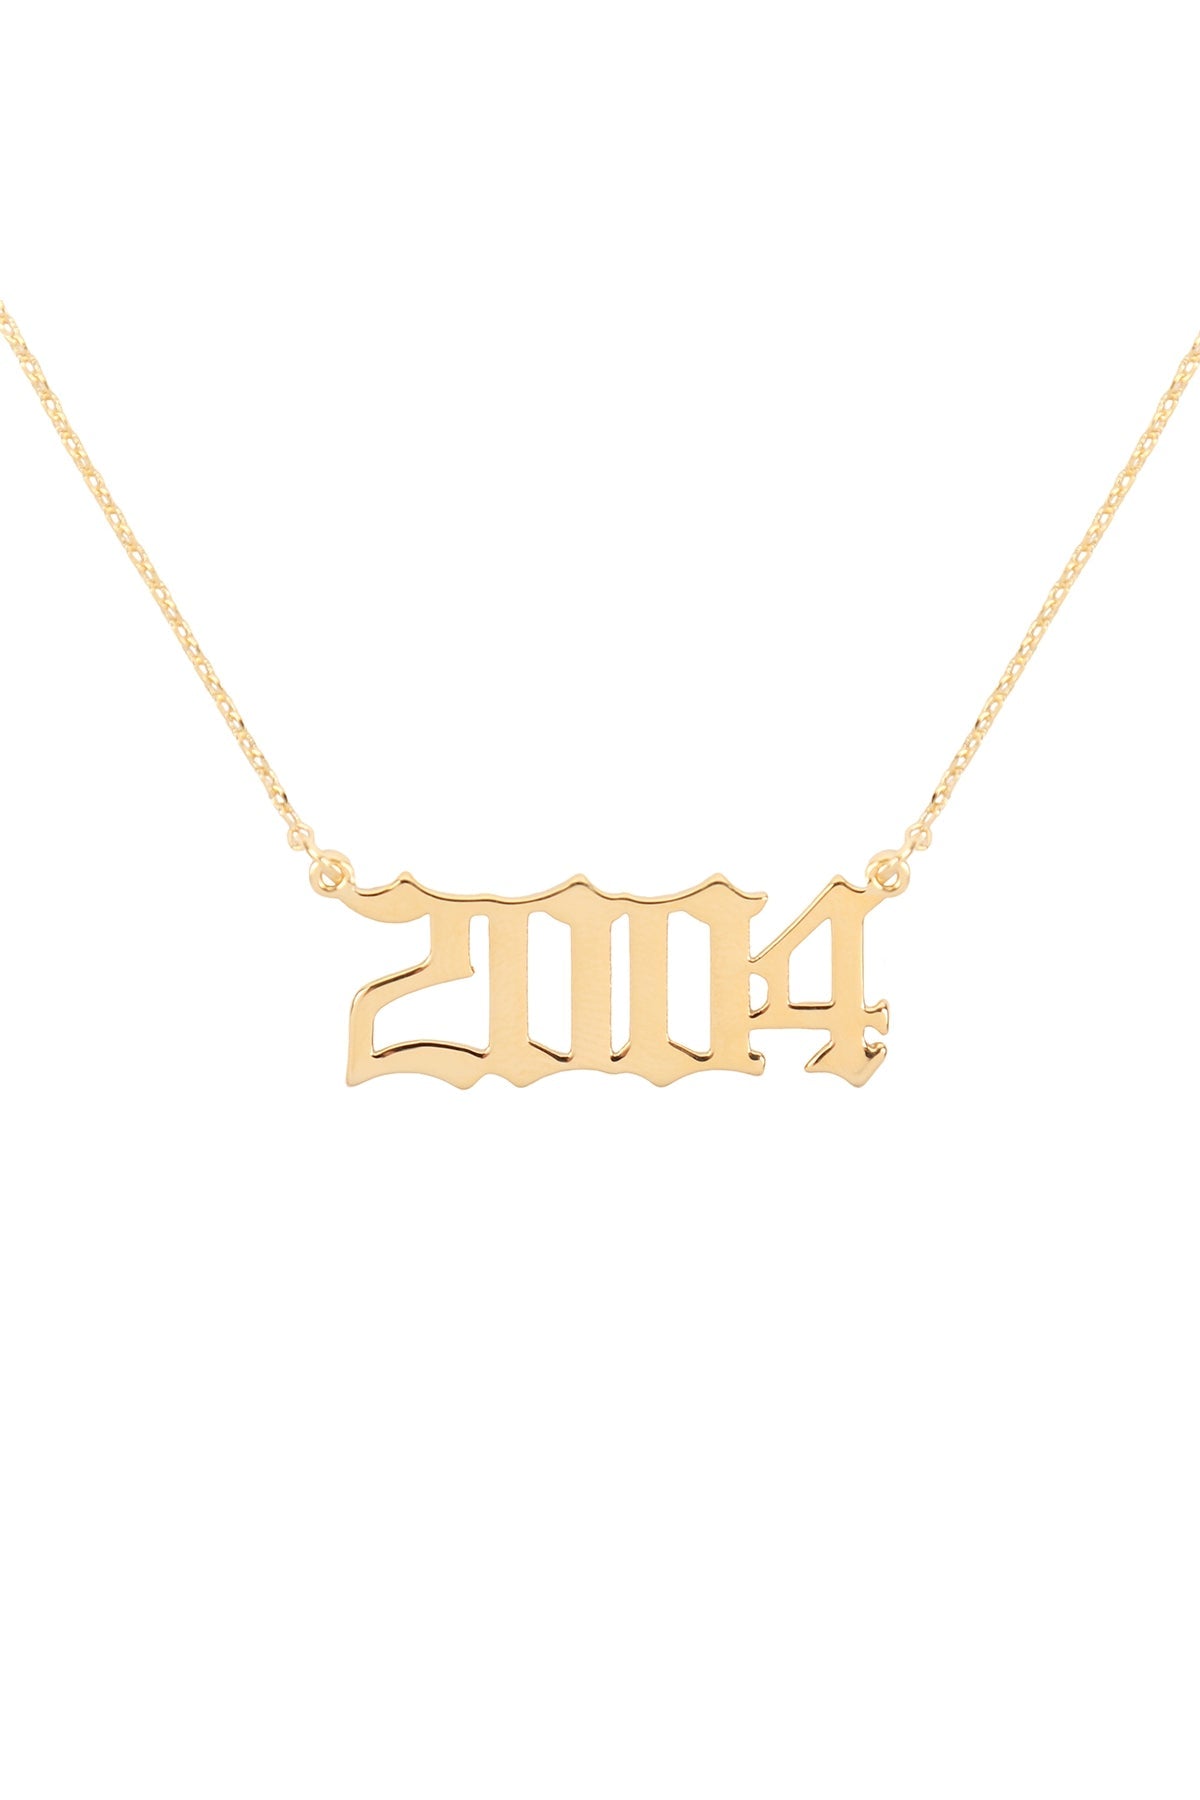 "2004" BIRTH YEAR PERSONALIZED NECKLACE